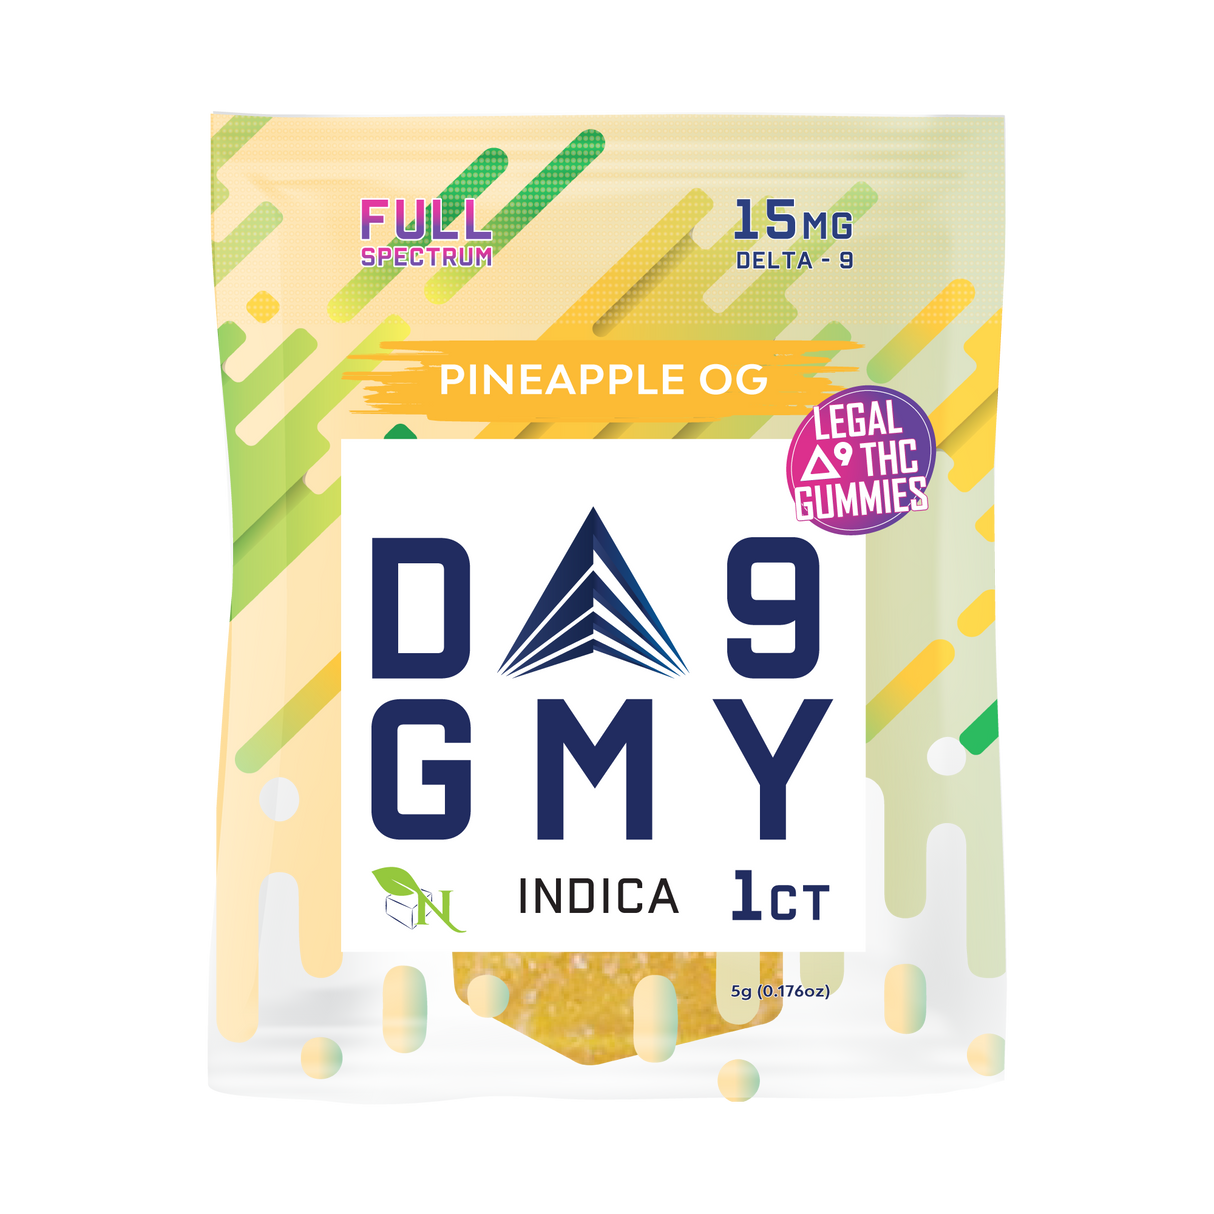 A Gift From Nature Delta-9 Single Indica Gummy 50CT Box: Pineapple OG